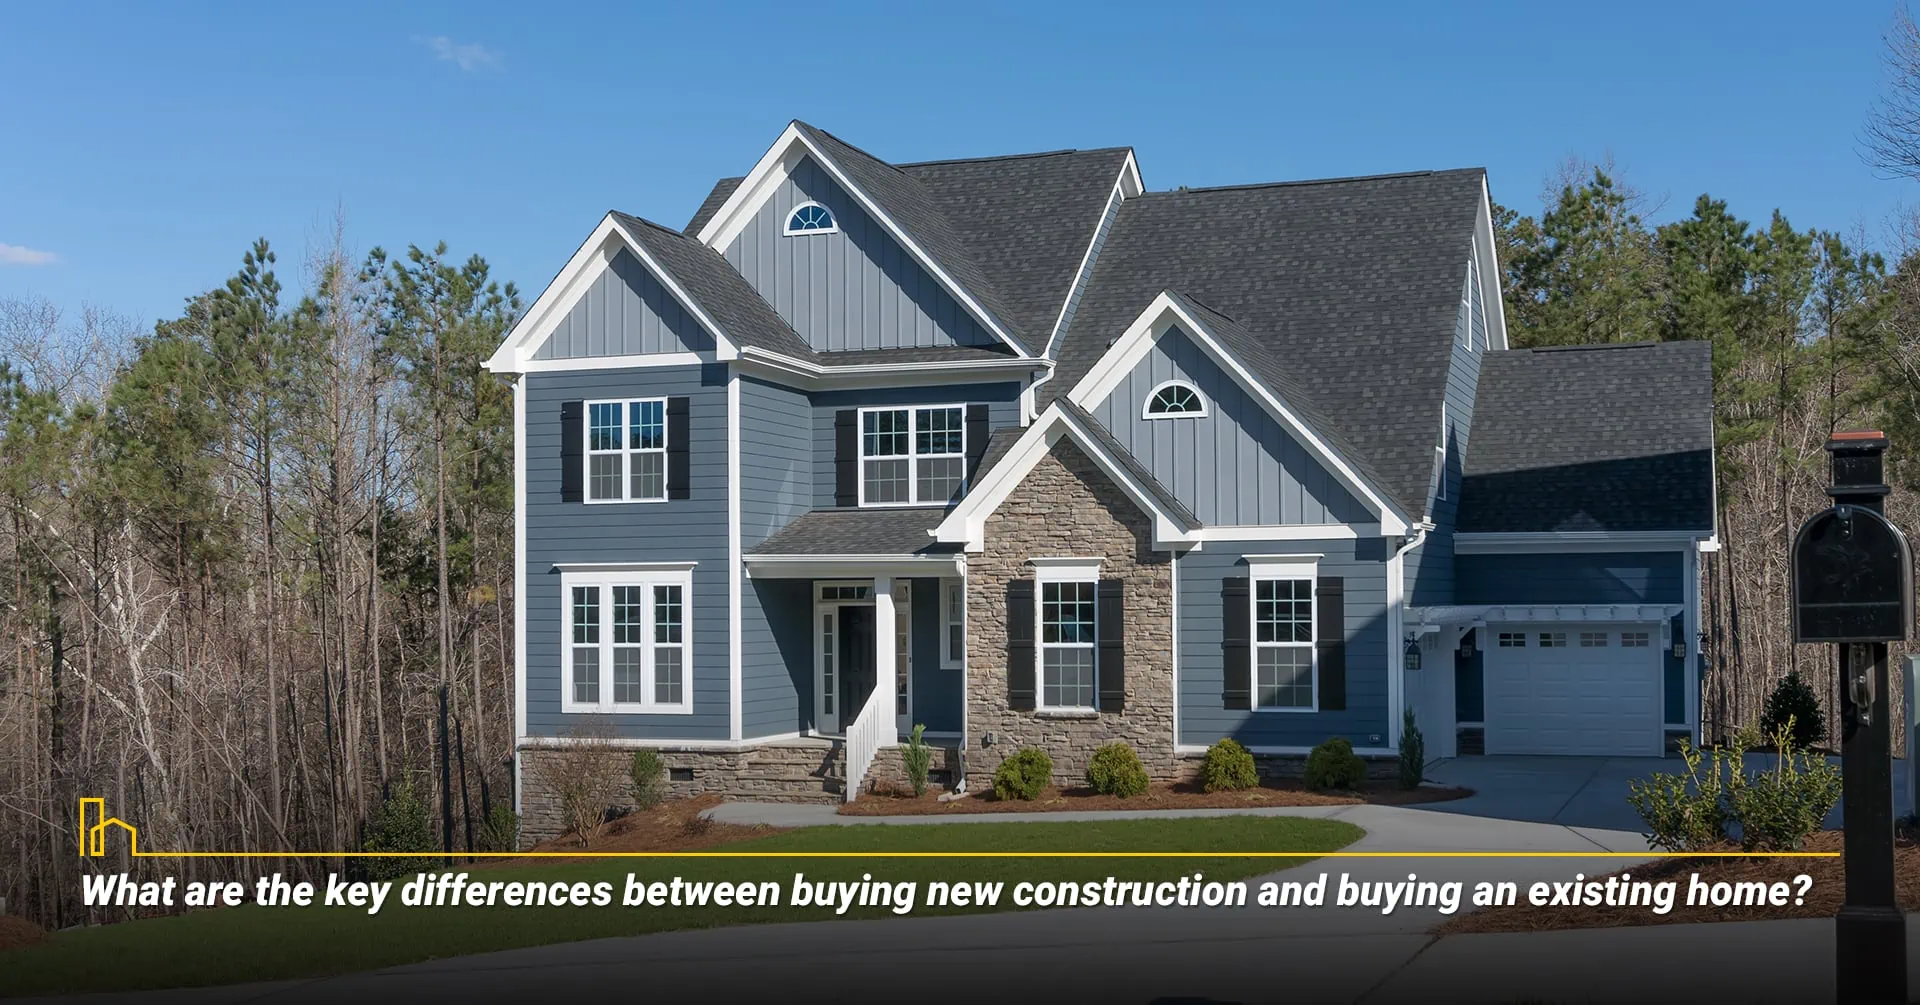 What are the key differences between buying new construction and buying an existing home?